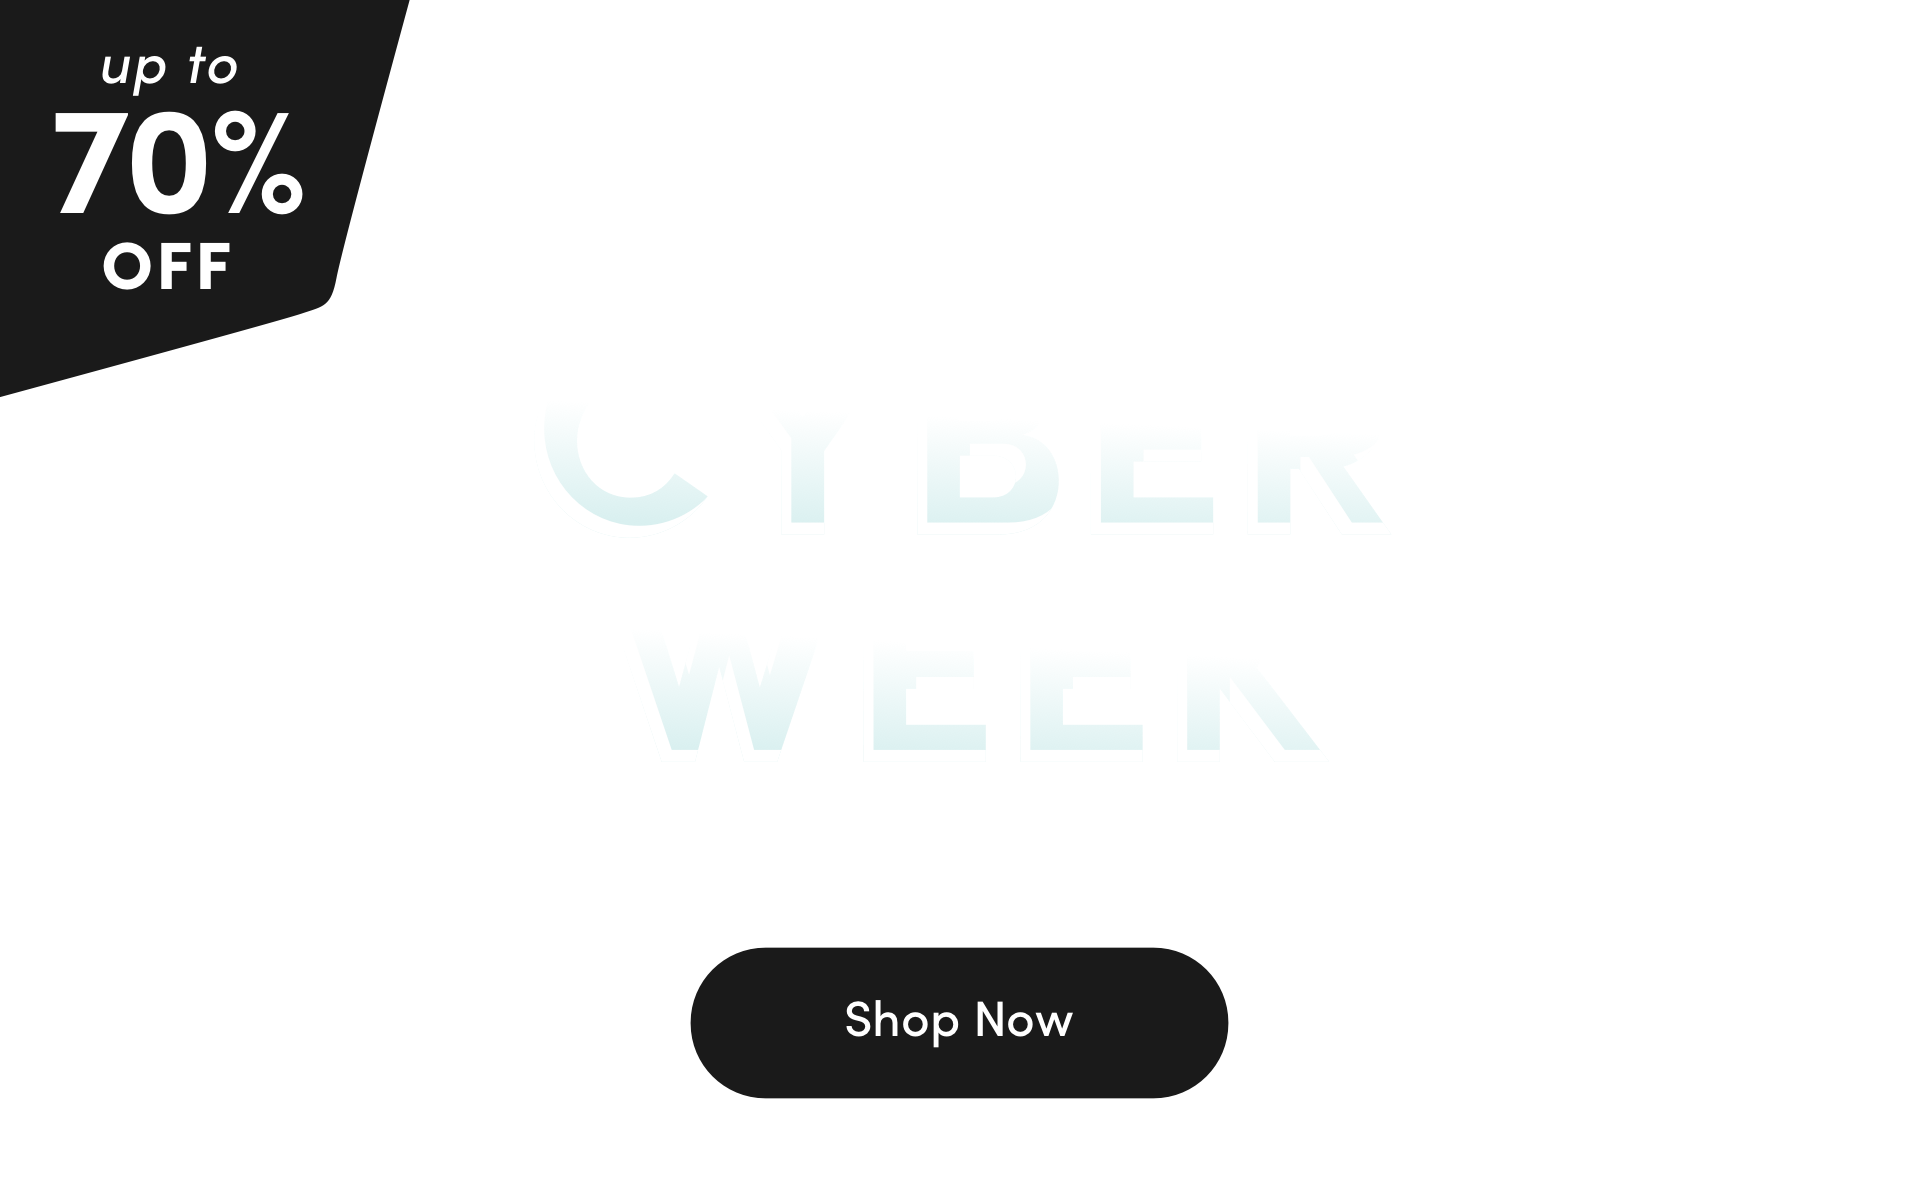 Up to 70% OFF. Epic Deals, Going Fast. Cyber Week. Everything Ships Free*. Shop Now.